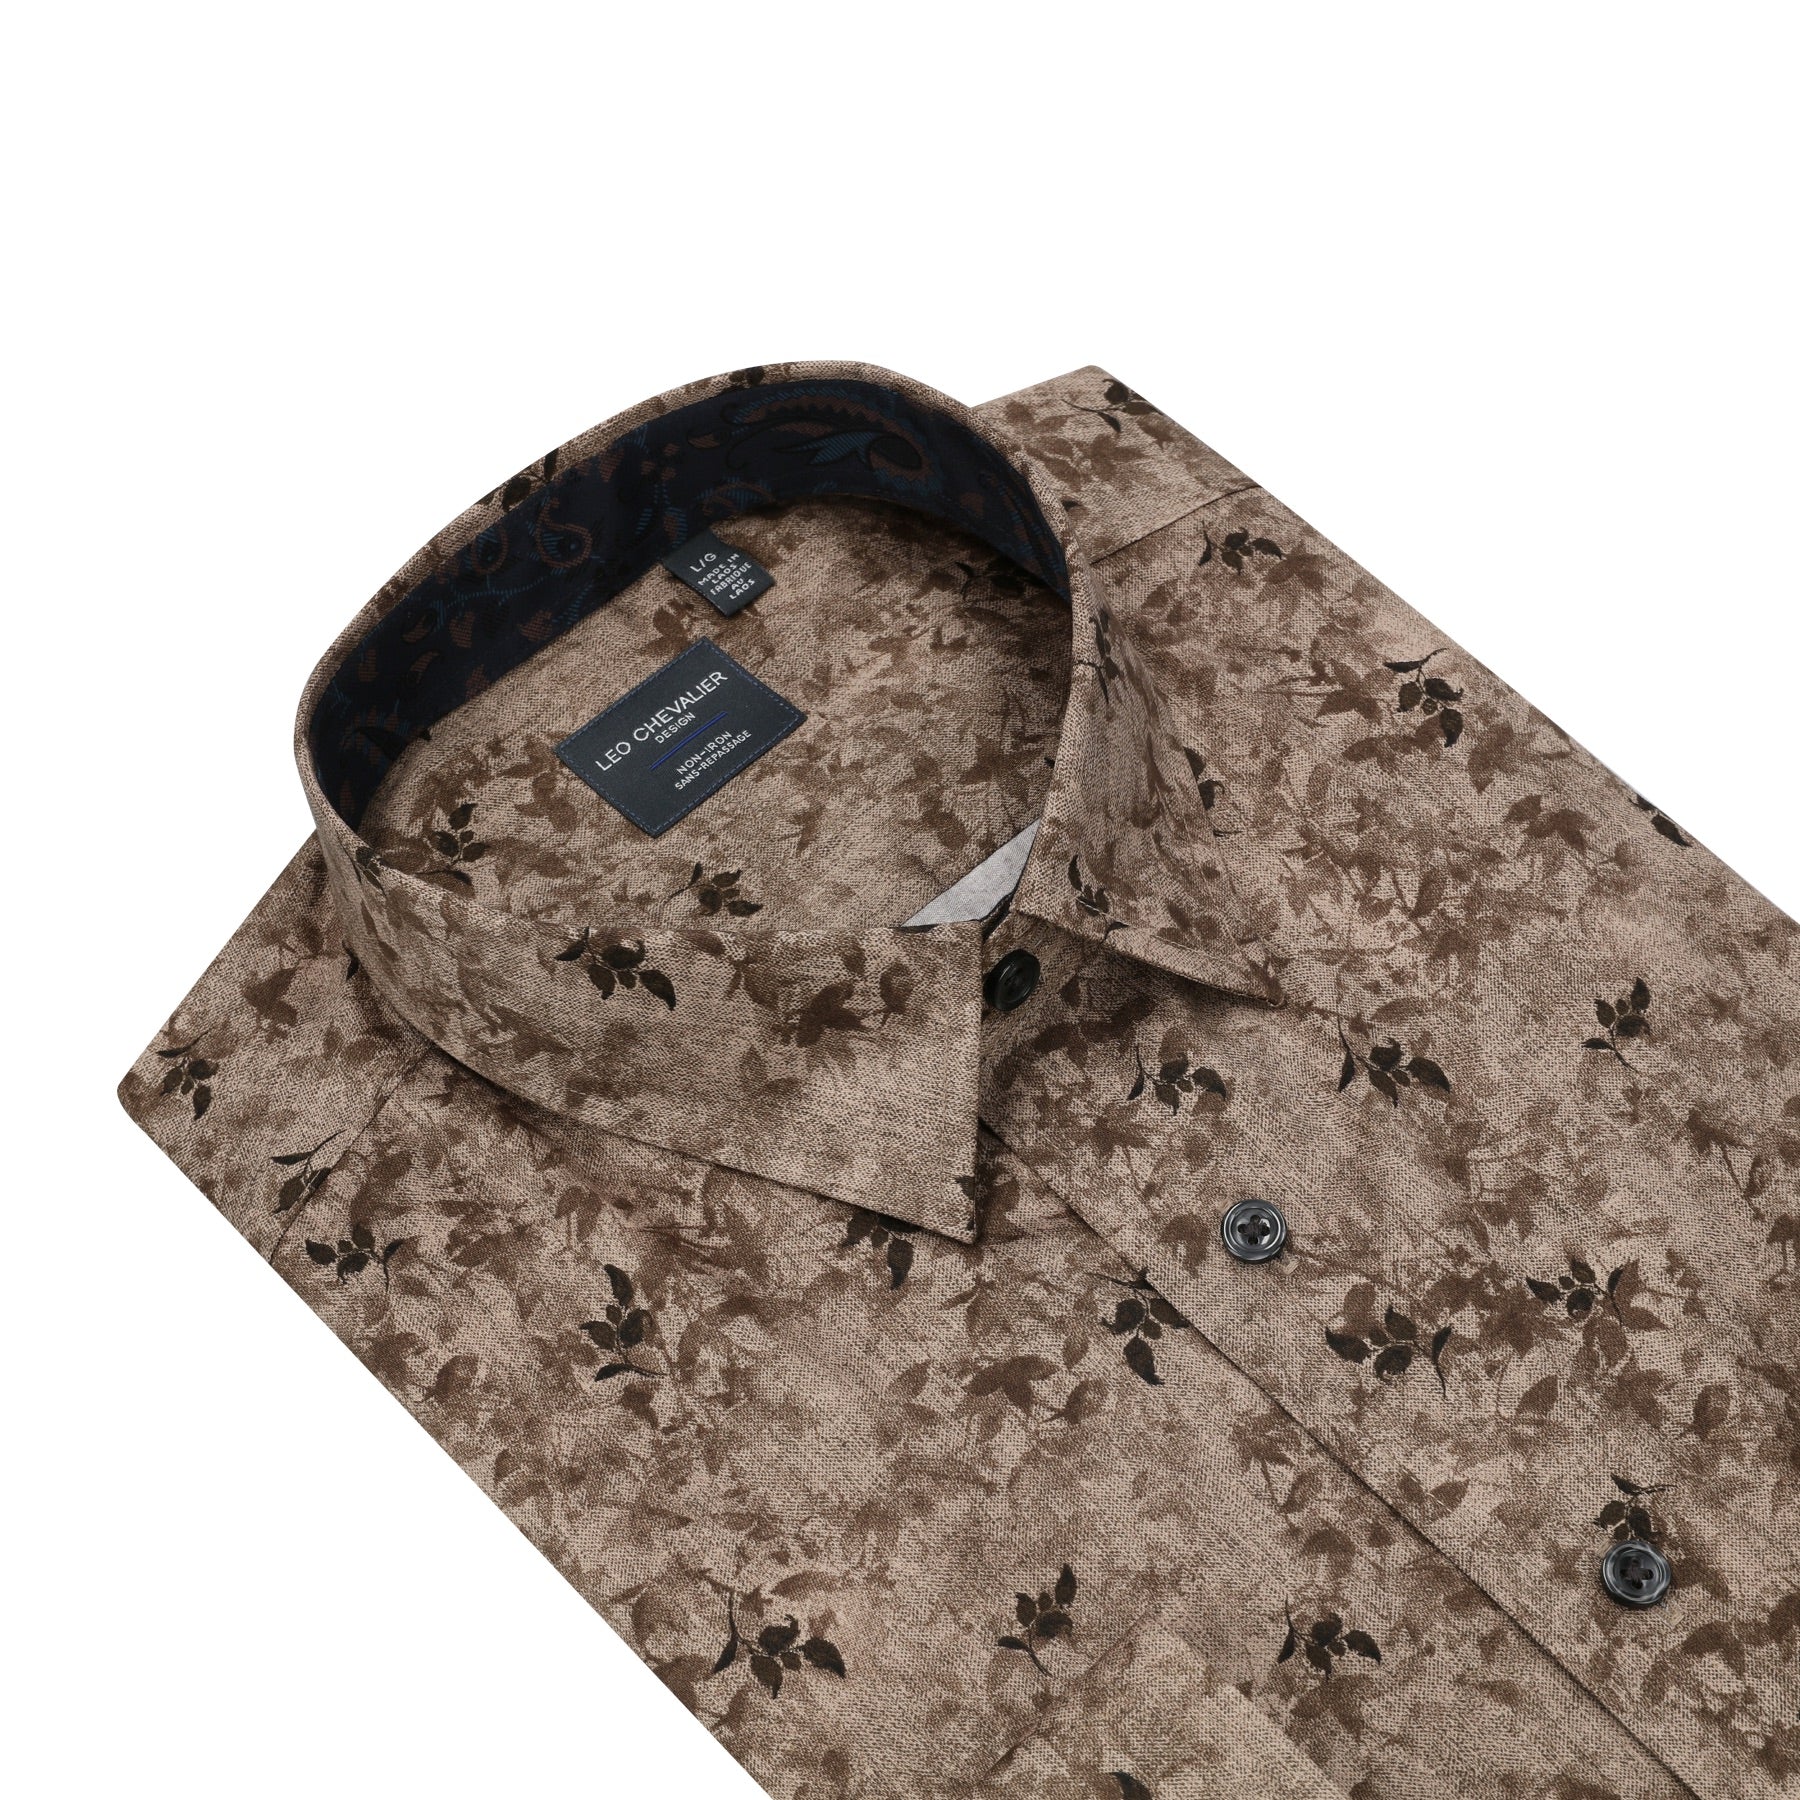 Earth and Brown Branch Print No-Iron Cotton Sport Shirt with Hidden Button Down Collar (Size X-Large) by Leo Chevalier